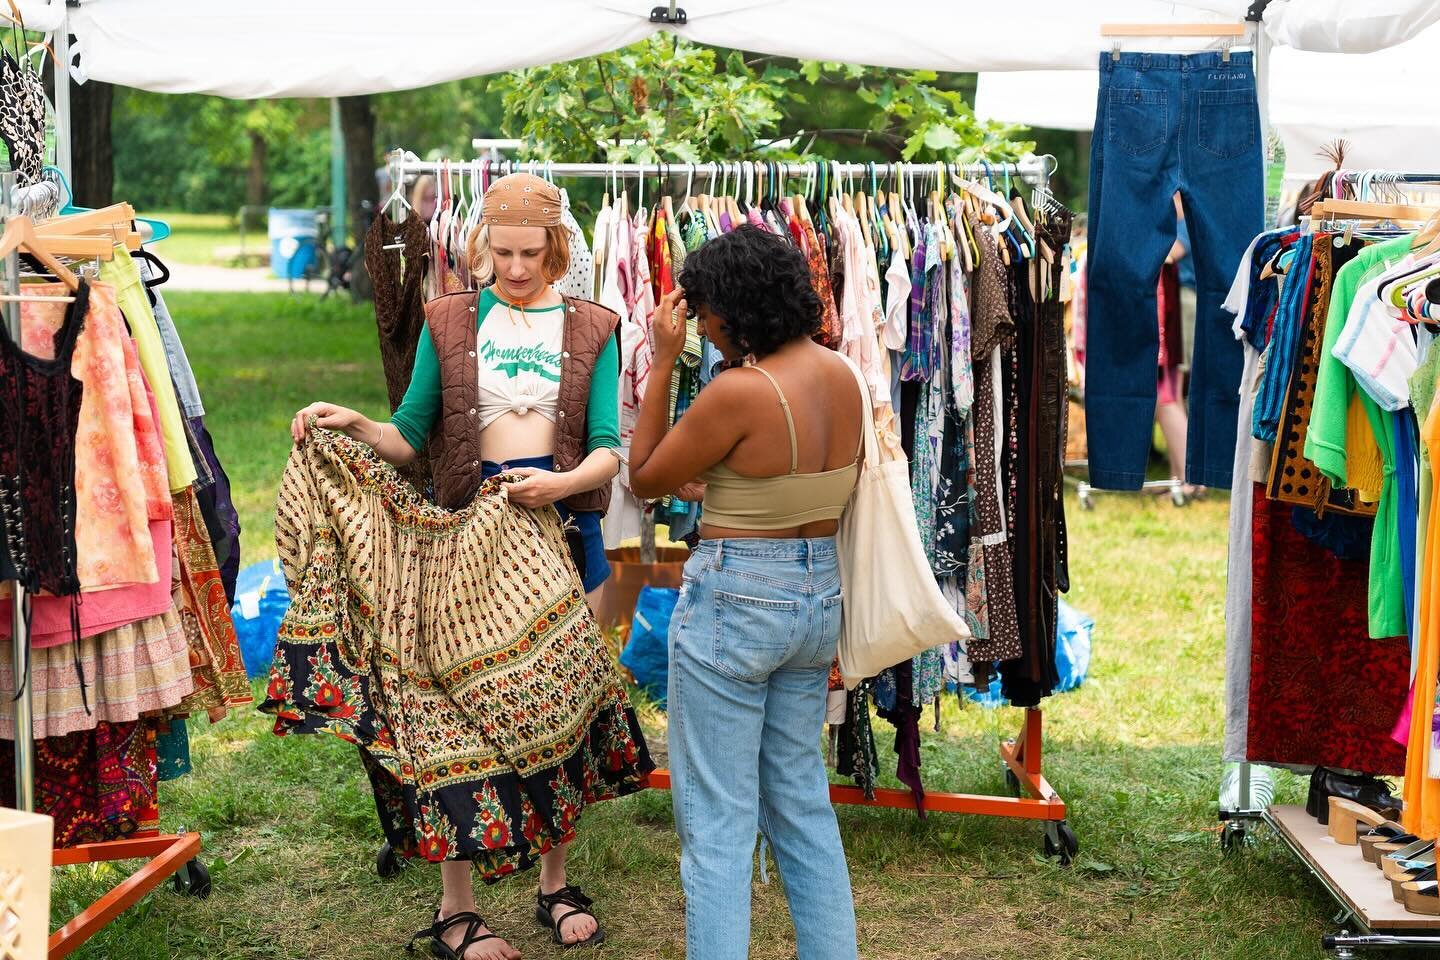 Calling all vendors! Registration is NOW open for the Minnehaha Falls Art Fair, July 19-21st! Don&rsquo;t wait, secure your spot today. Link in bio. We&rsquo;re counting down the days for our epic summer markets! Drop a ☀️ in the comments if you&rsqu